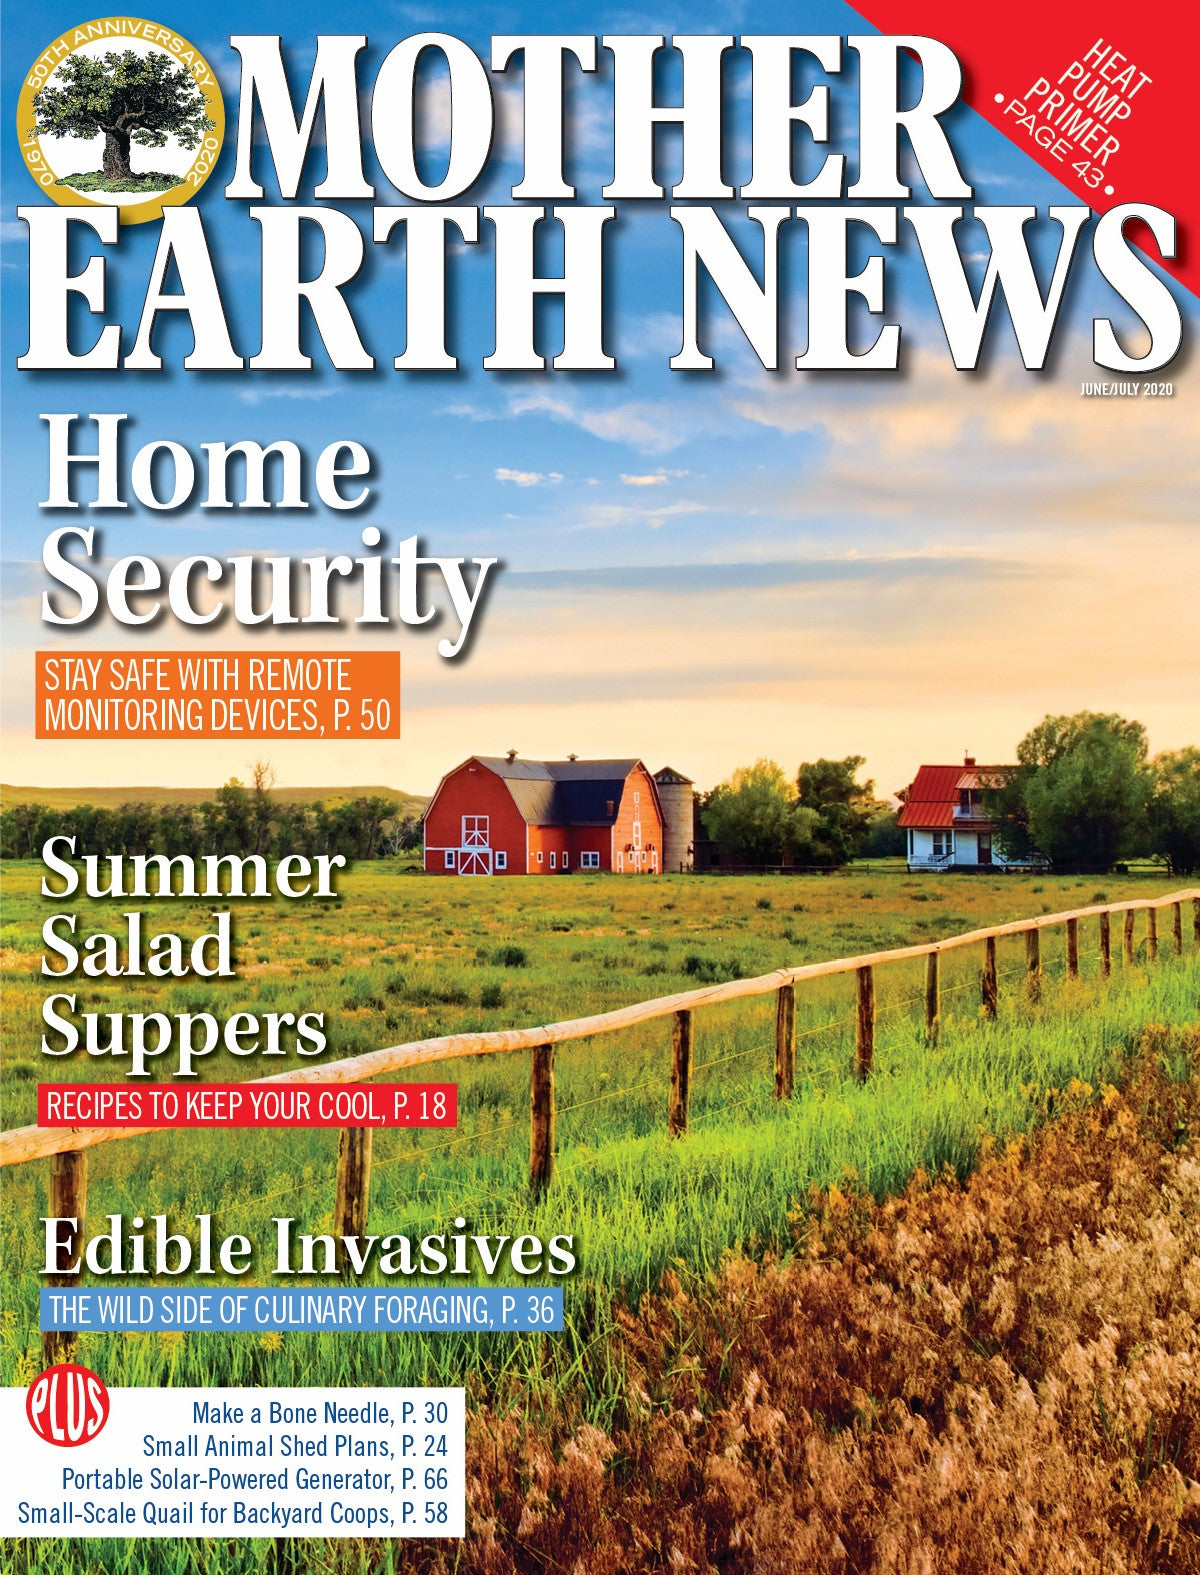 MOTHER EARTH NEWS JUNE/JULY 2020 #300